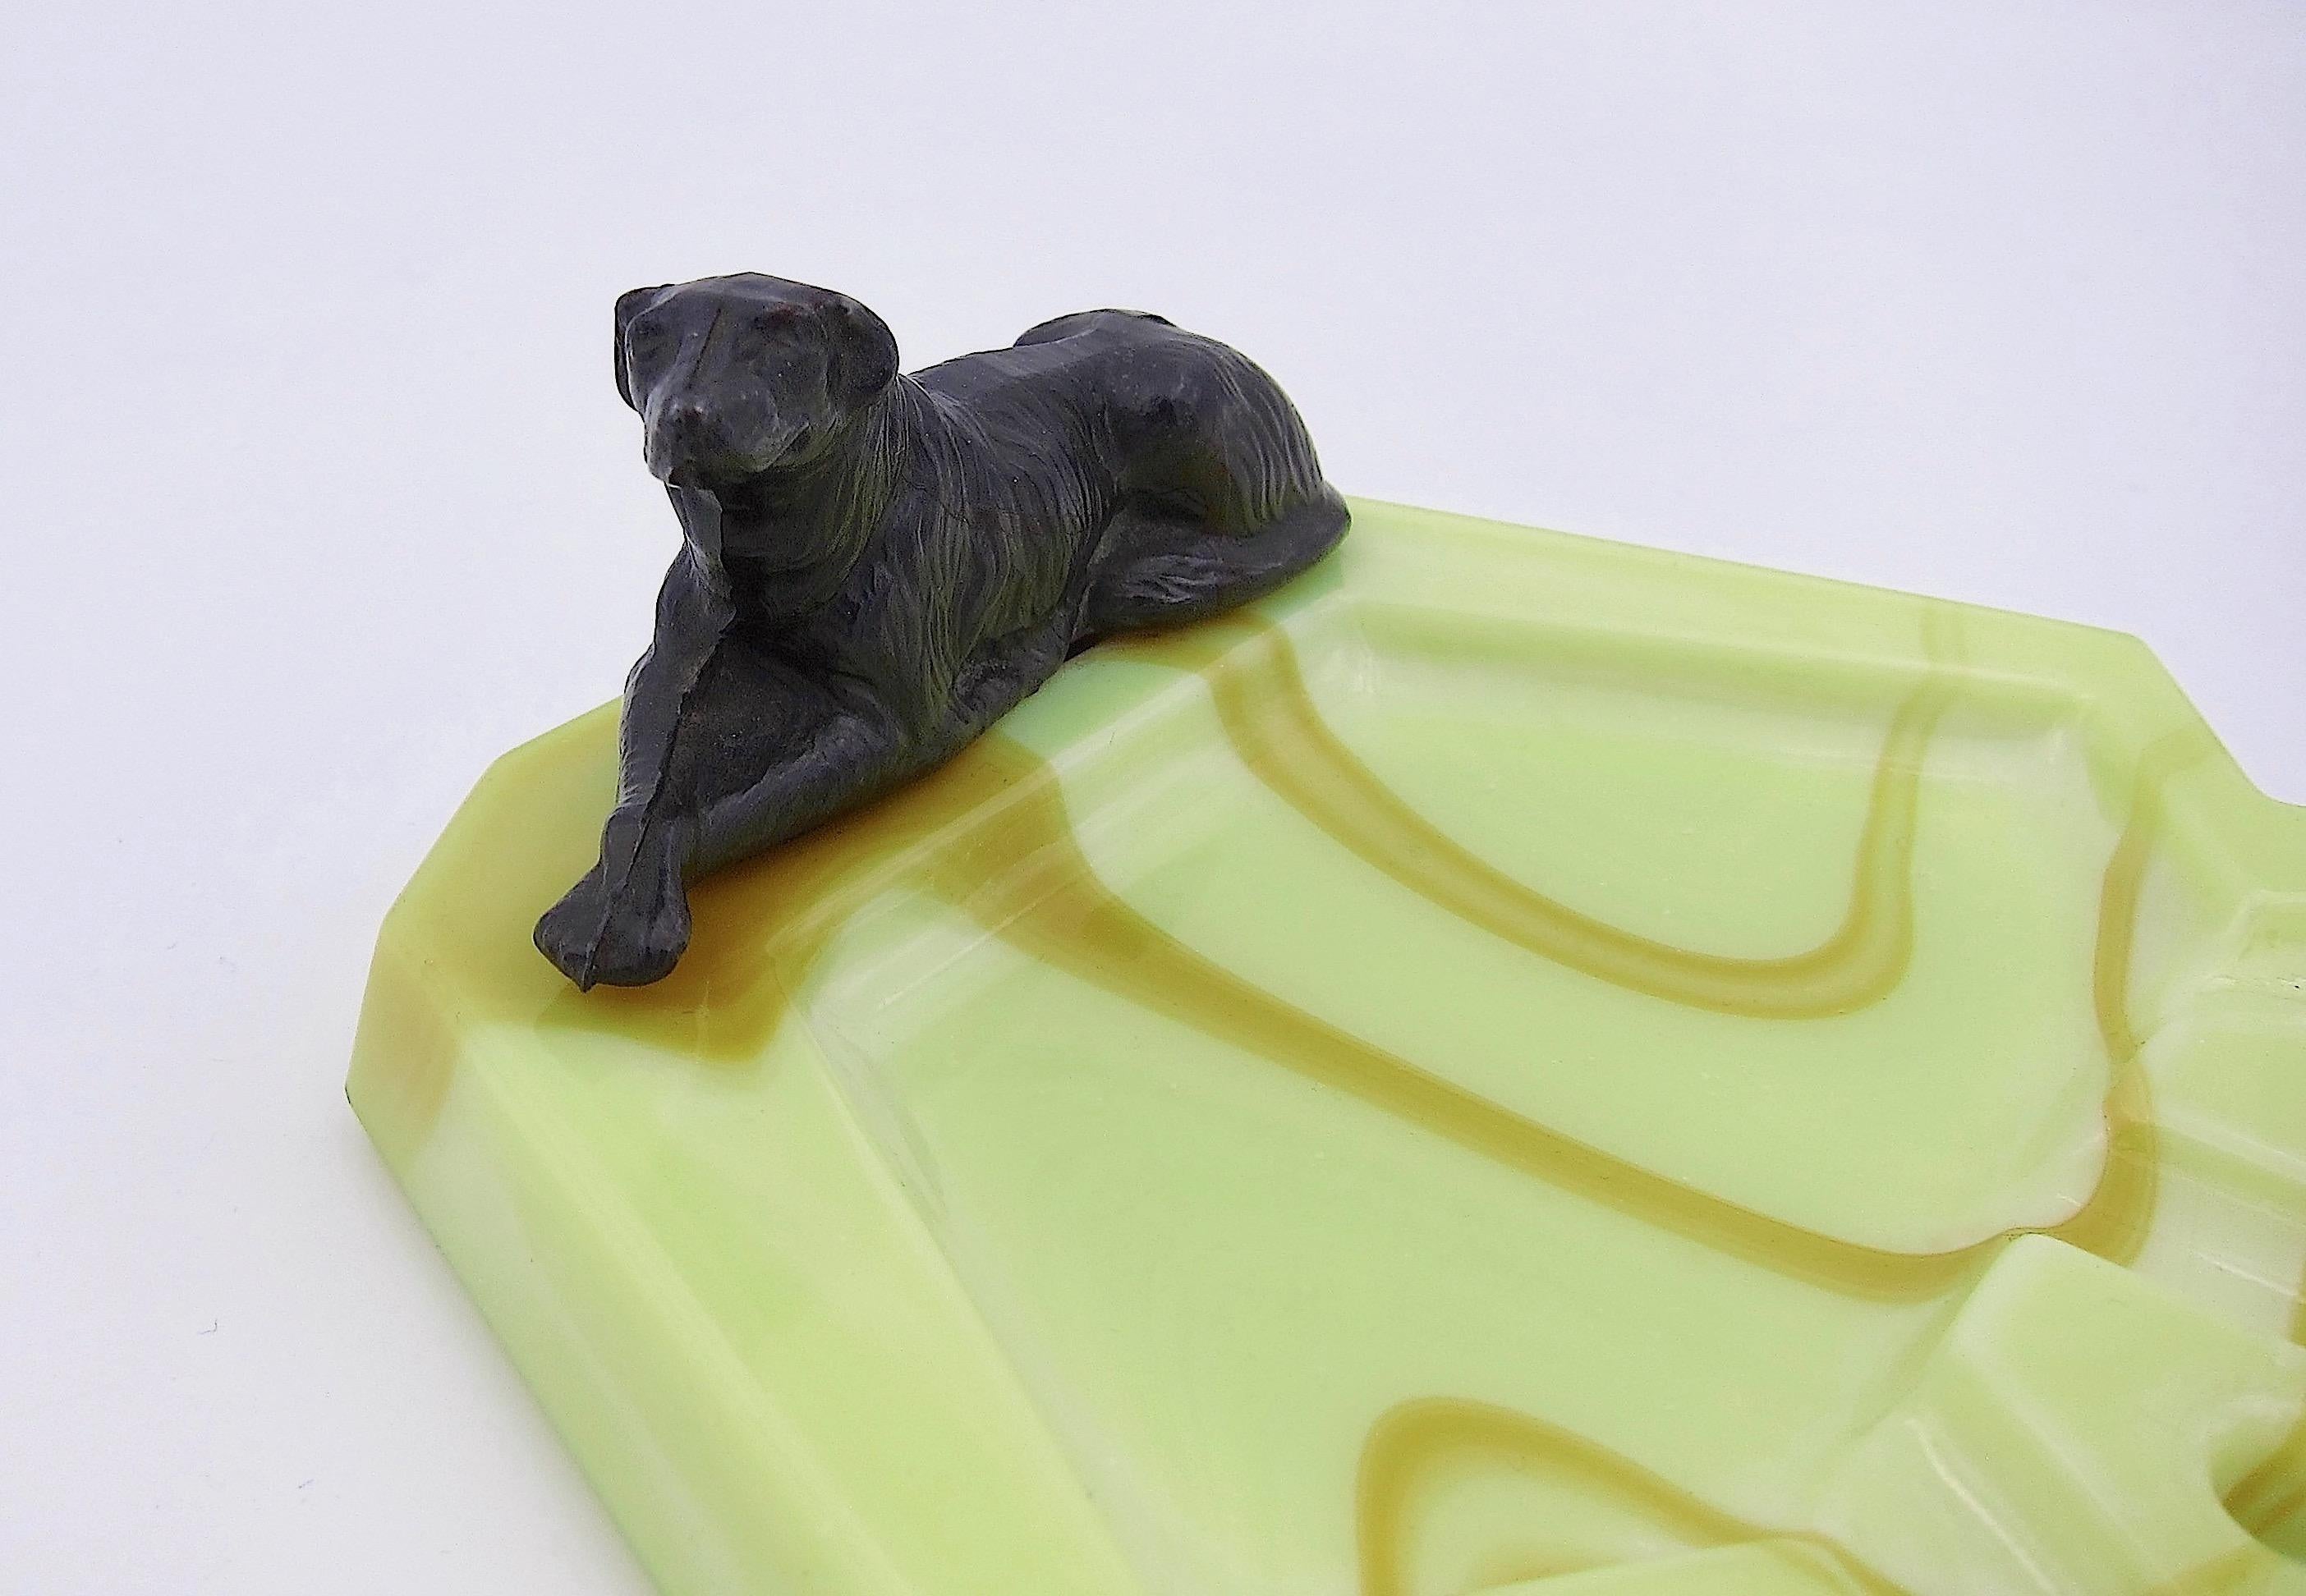 American Art Deco Ashtray or Catchall Dish in Marbleized Glass with Metal Borzoi Hound